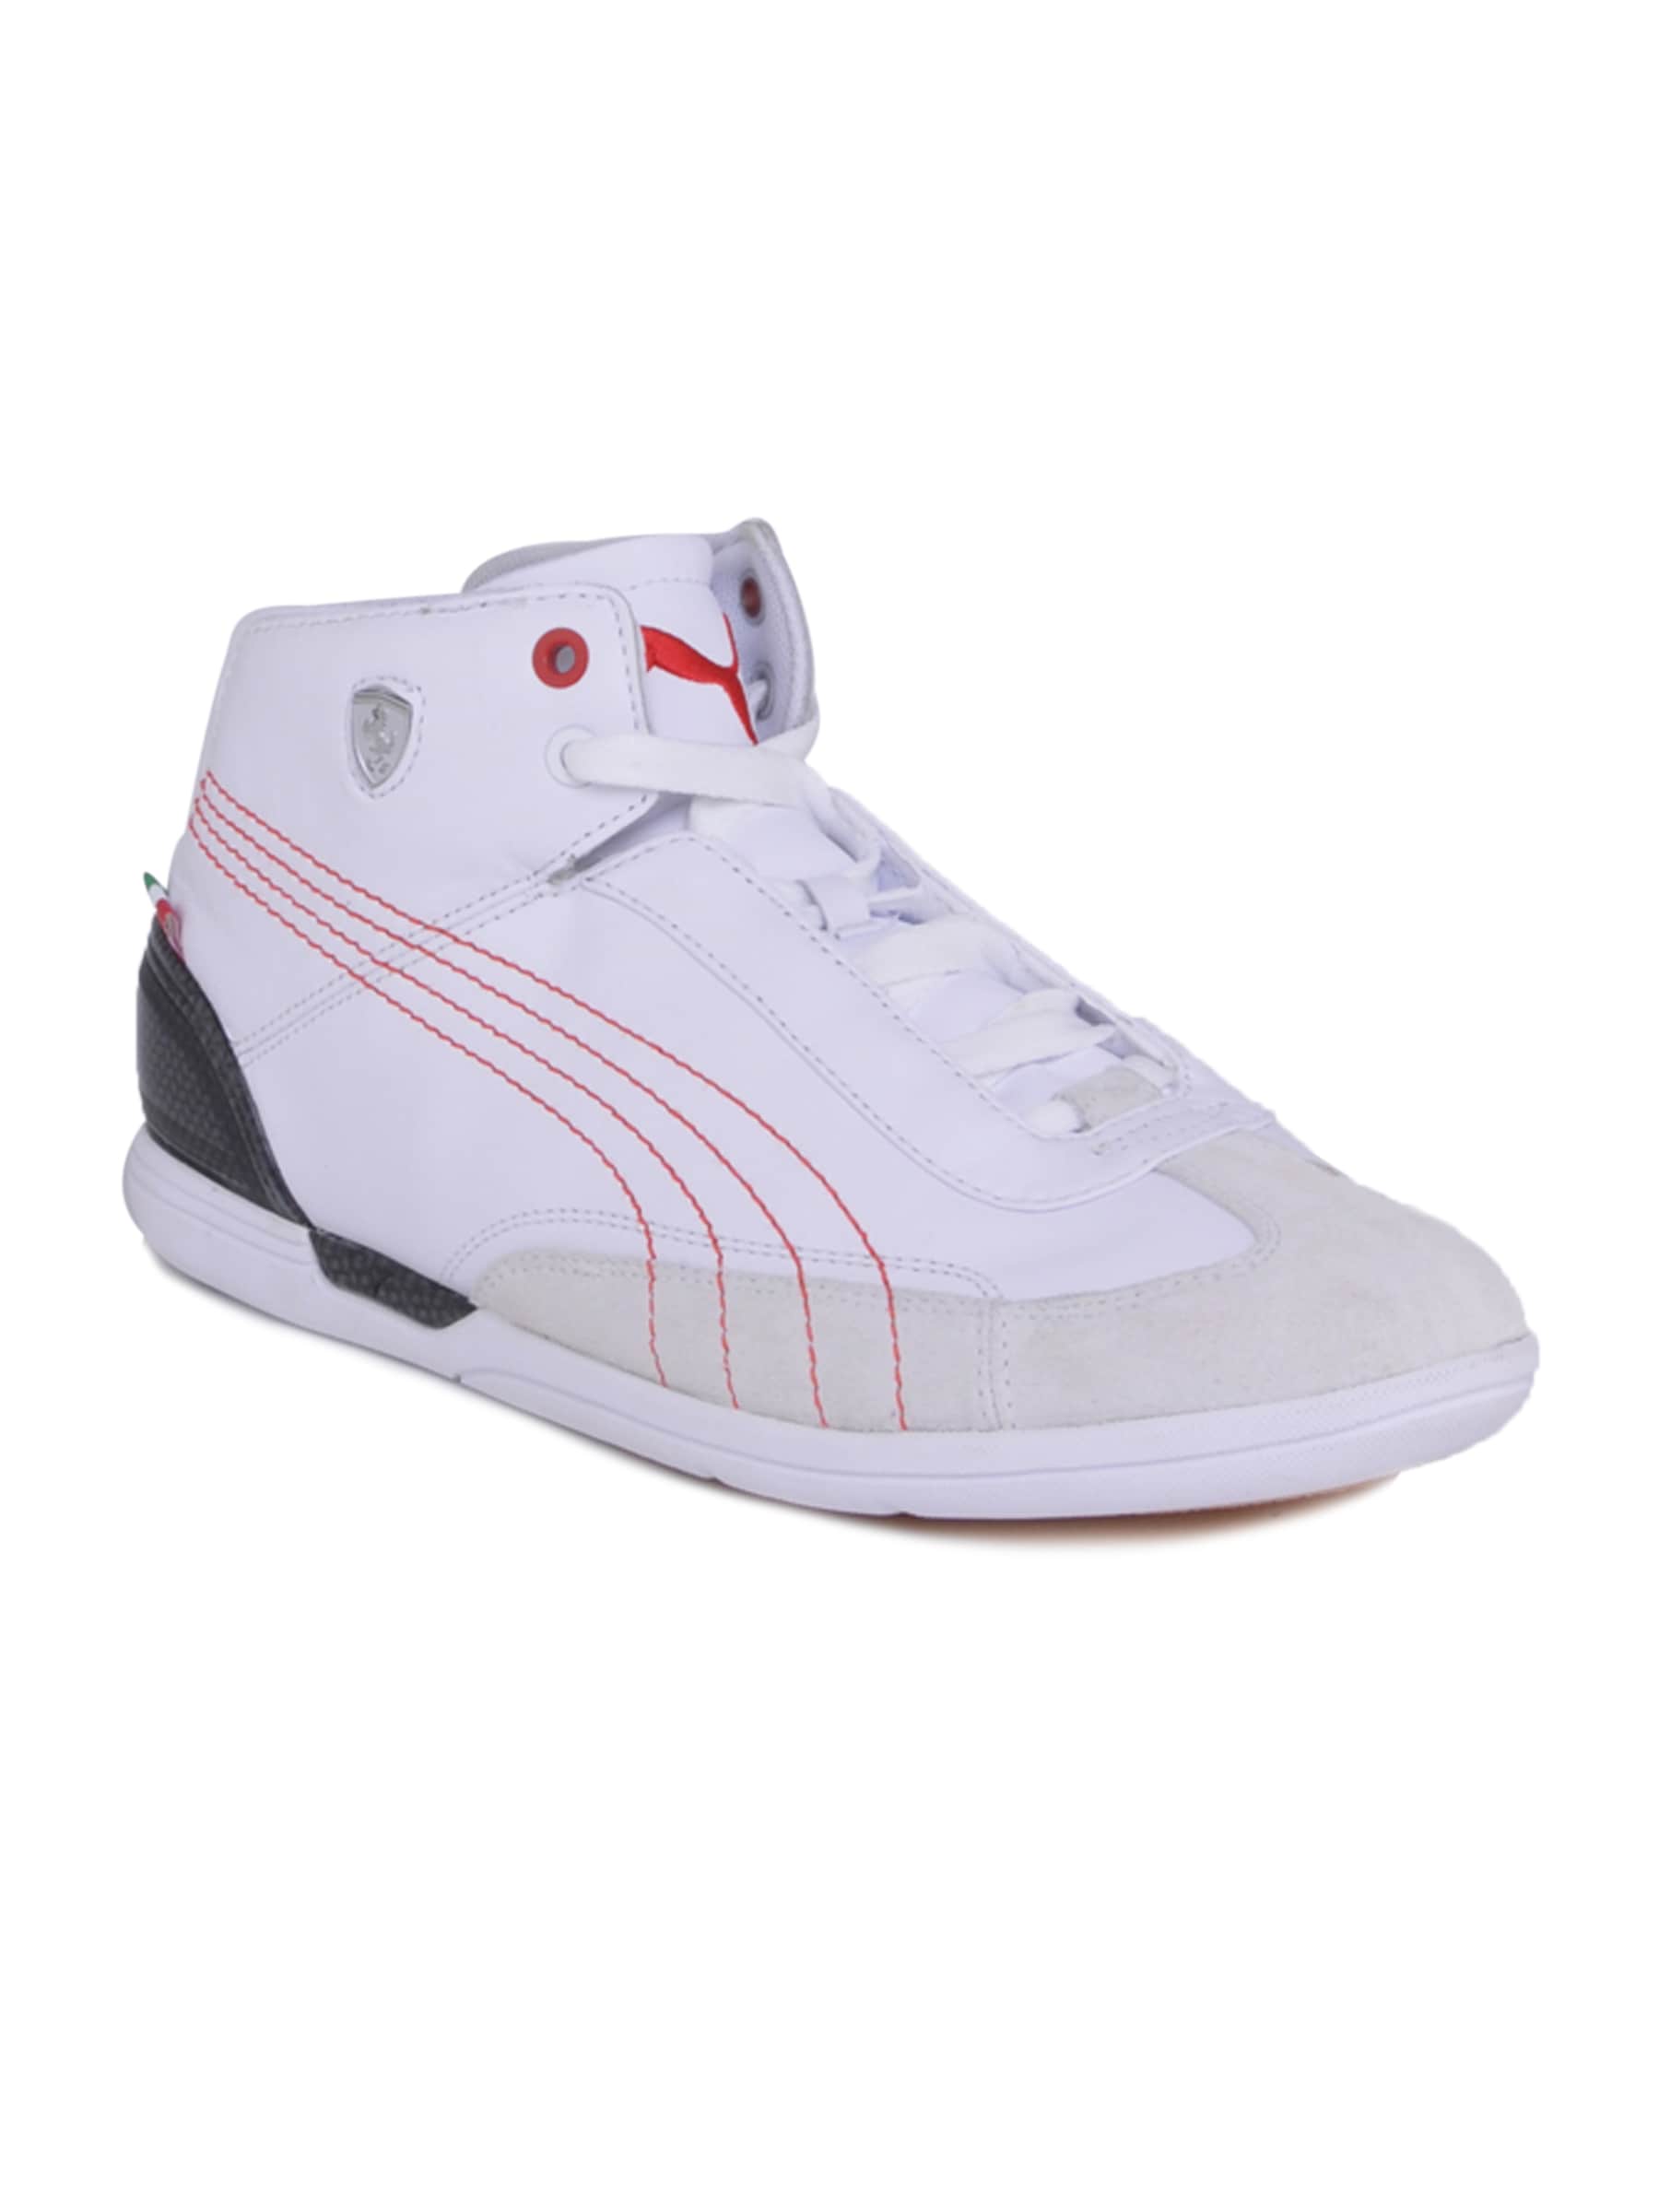 Puma Men D Force Mid SF White Casual Shoes